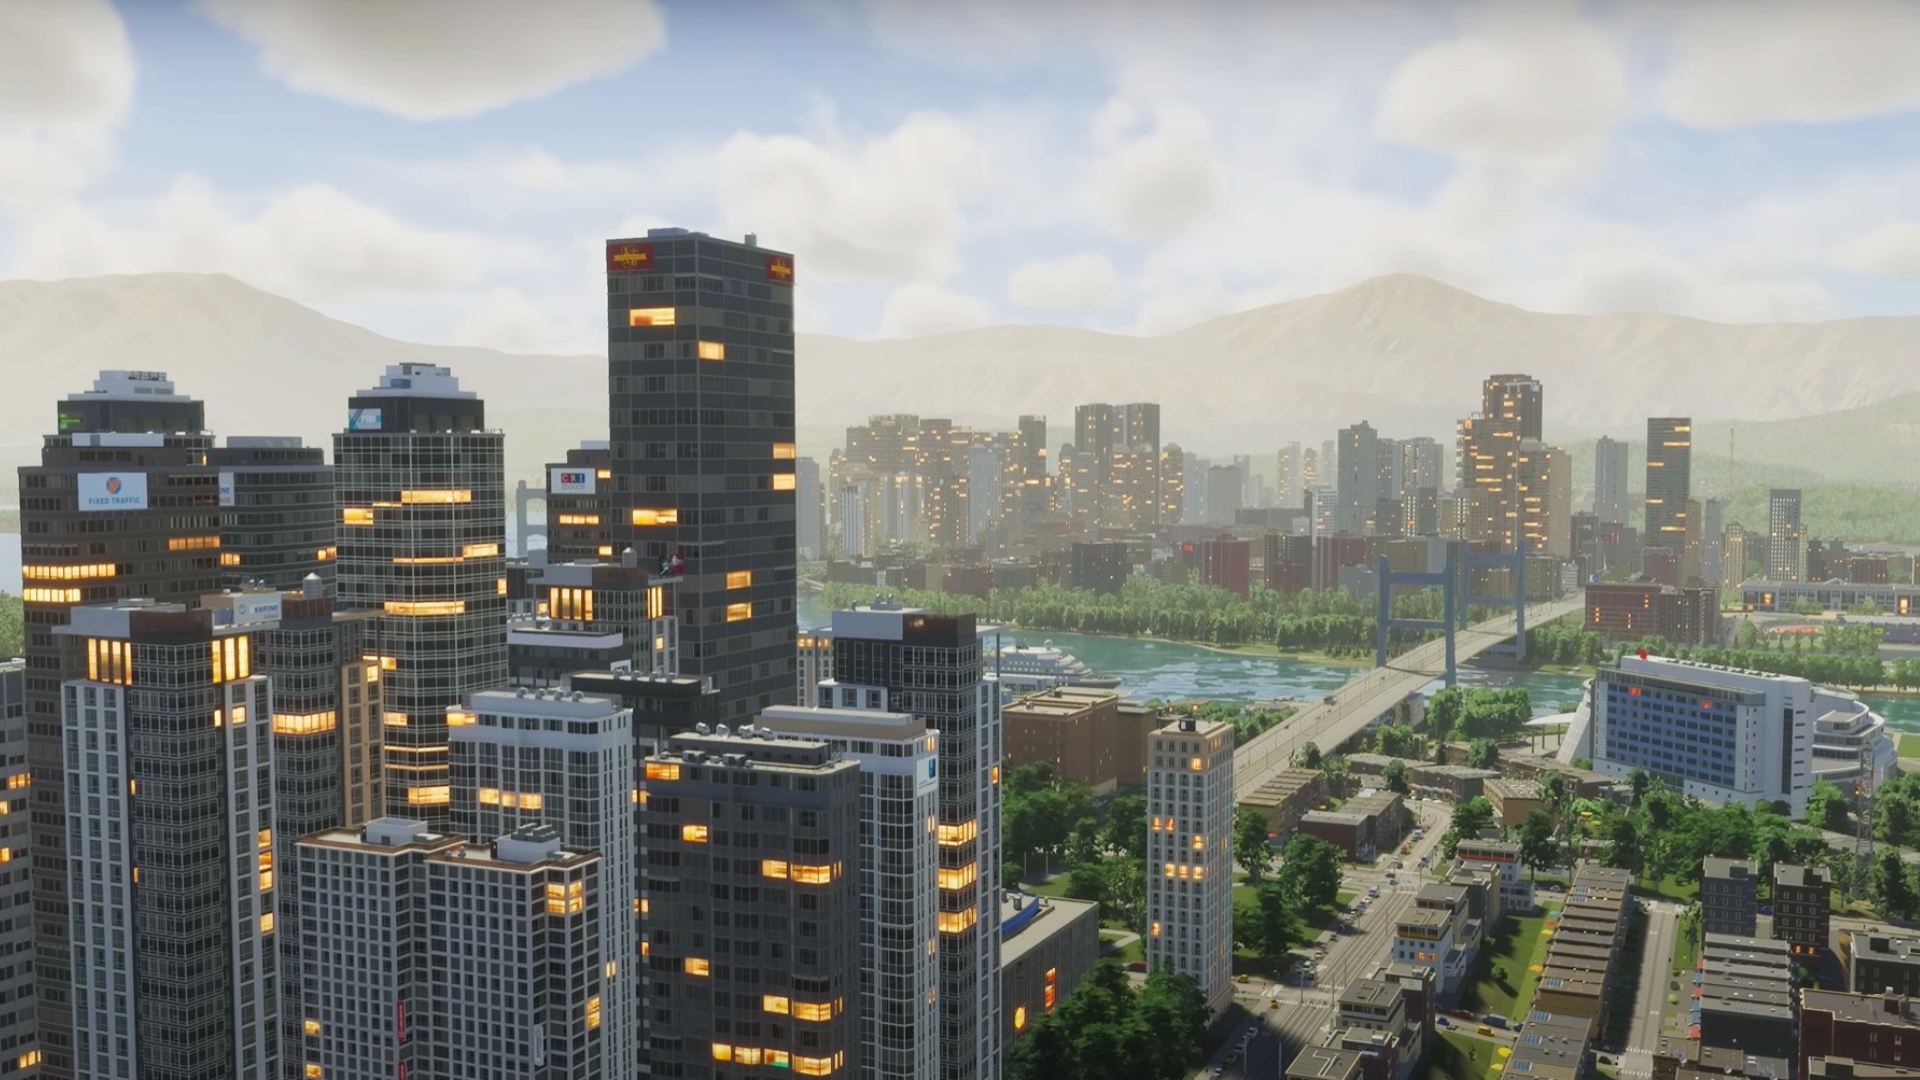 No, Cities: Skylines 2's wonky performance isn't because it's